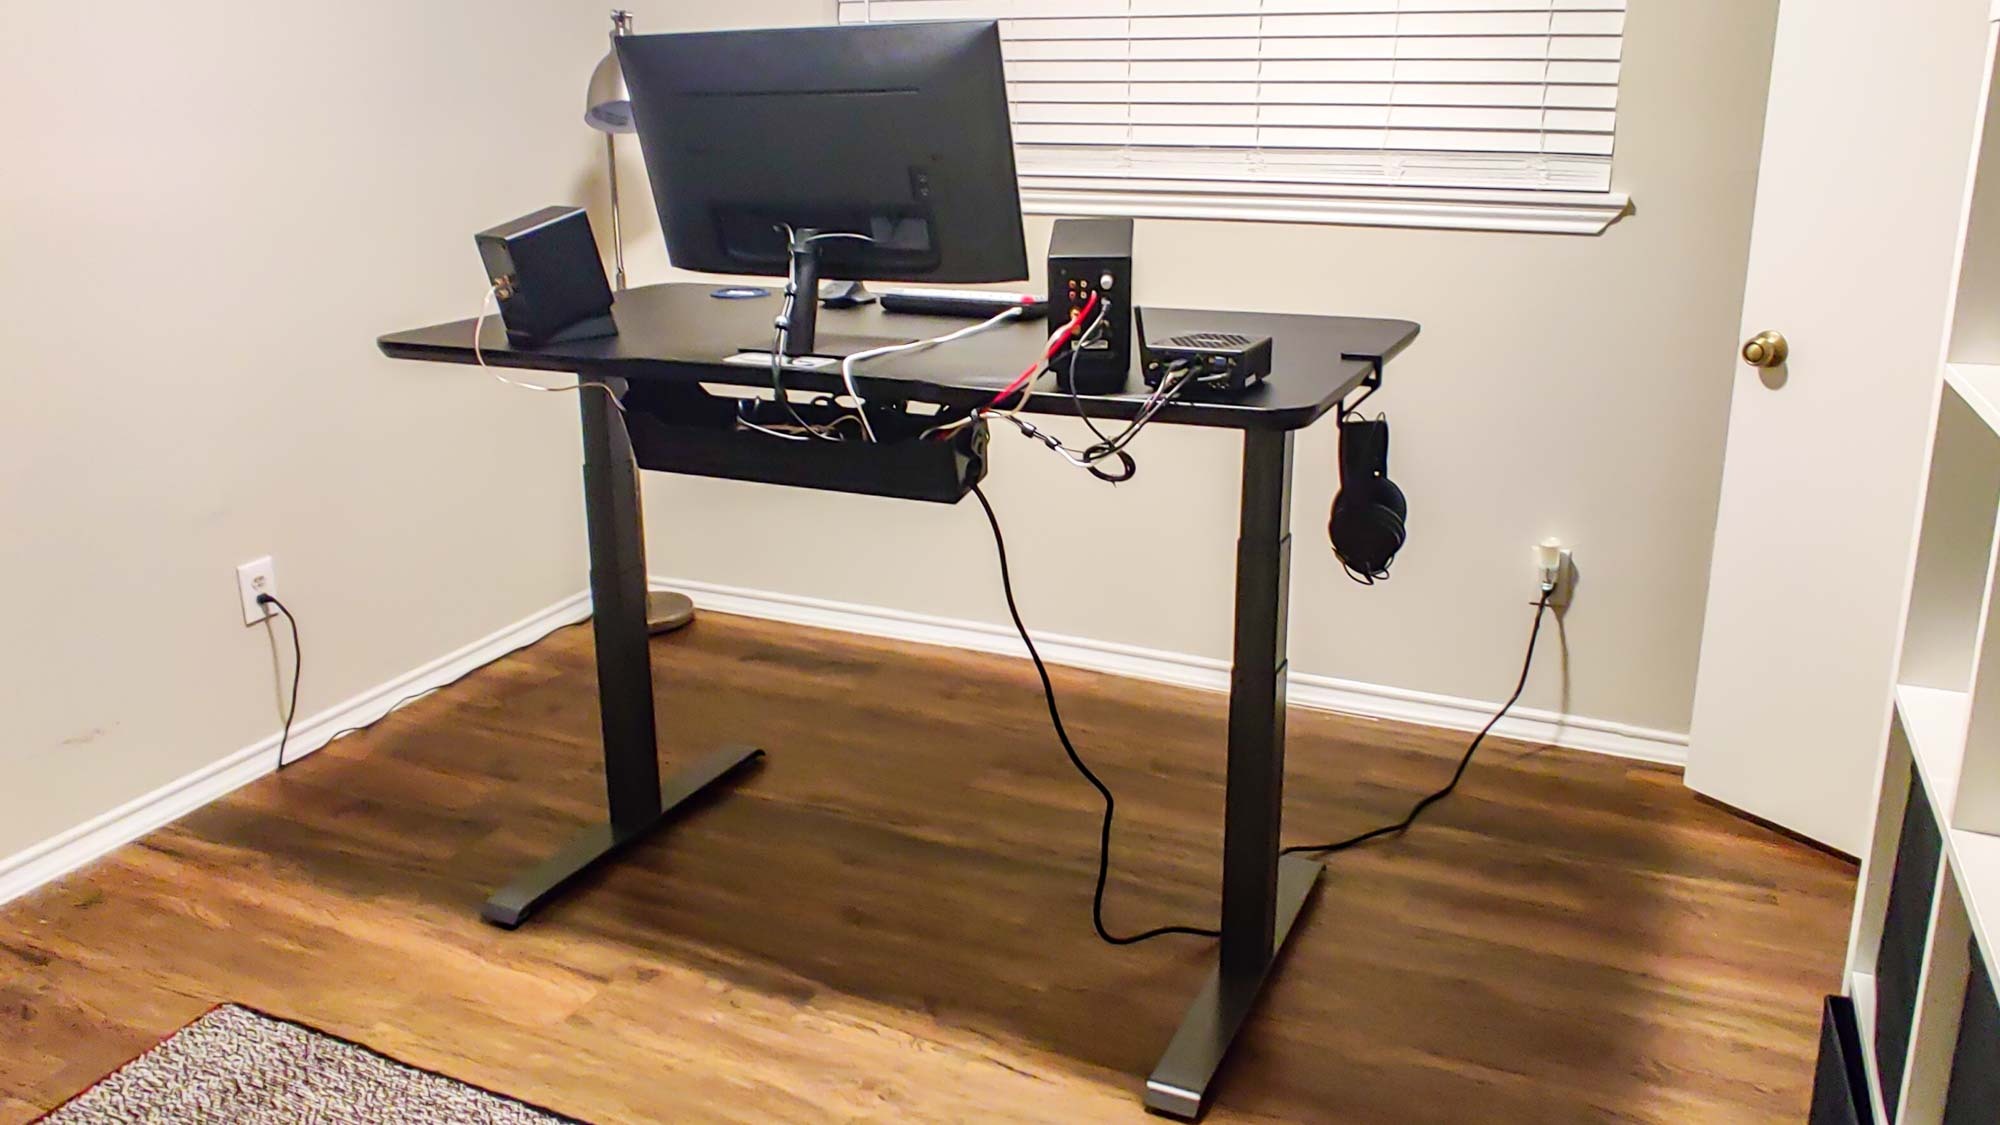 Vari Electric standing desk with drawer for cable management